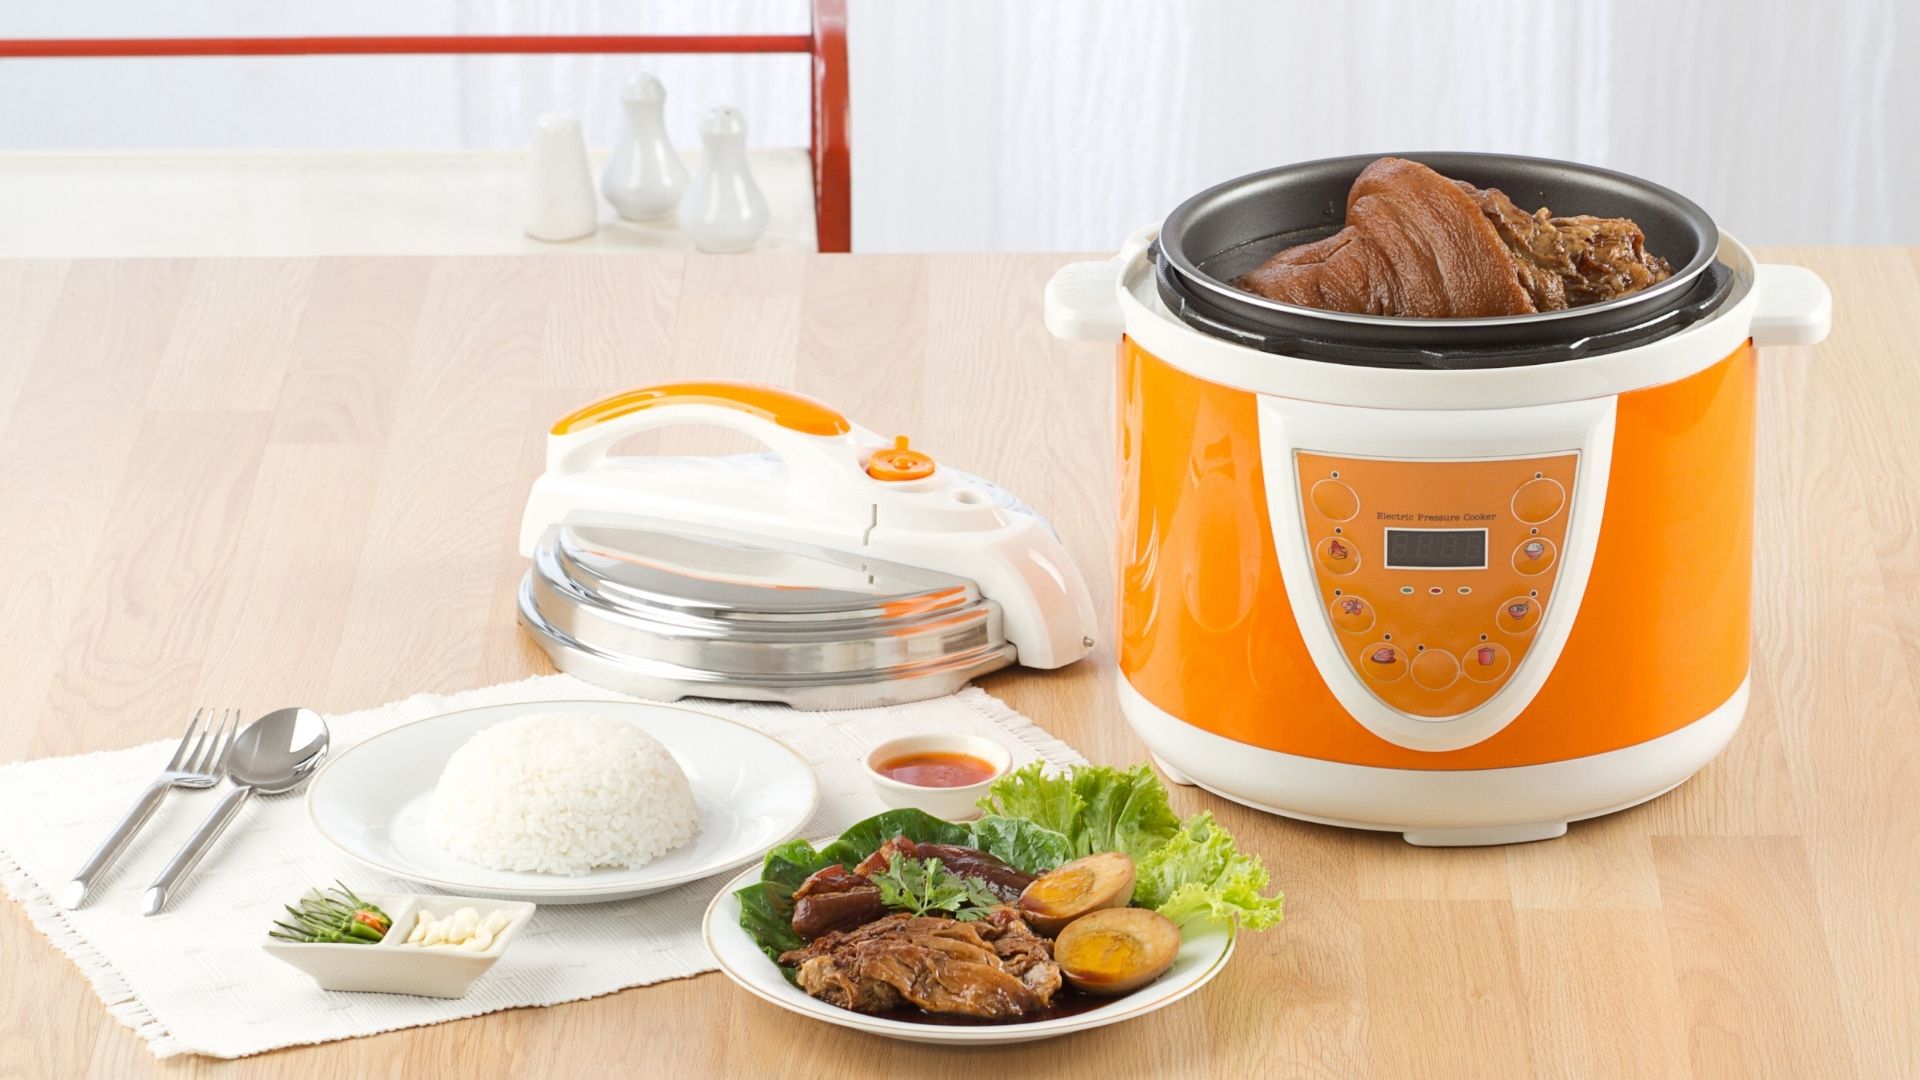 Top 6 Best Electric Pressure Cooker In India (2022 Edition)￼